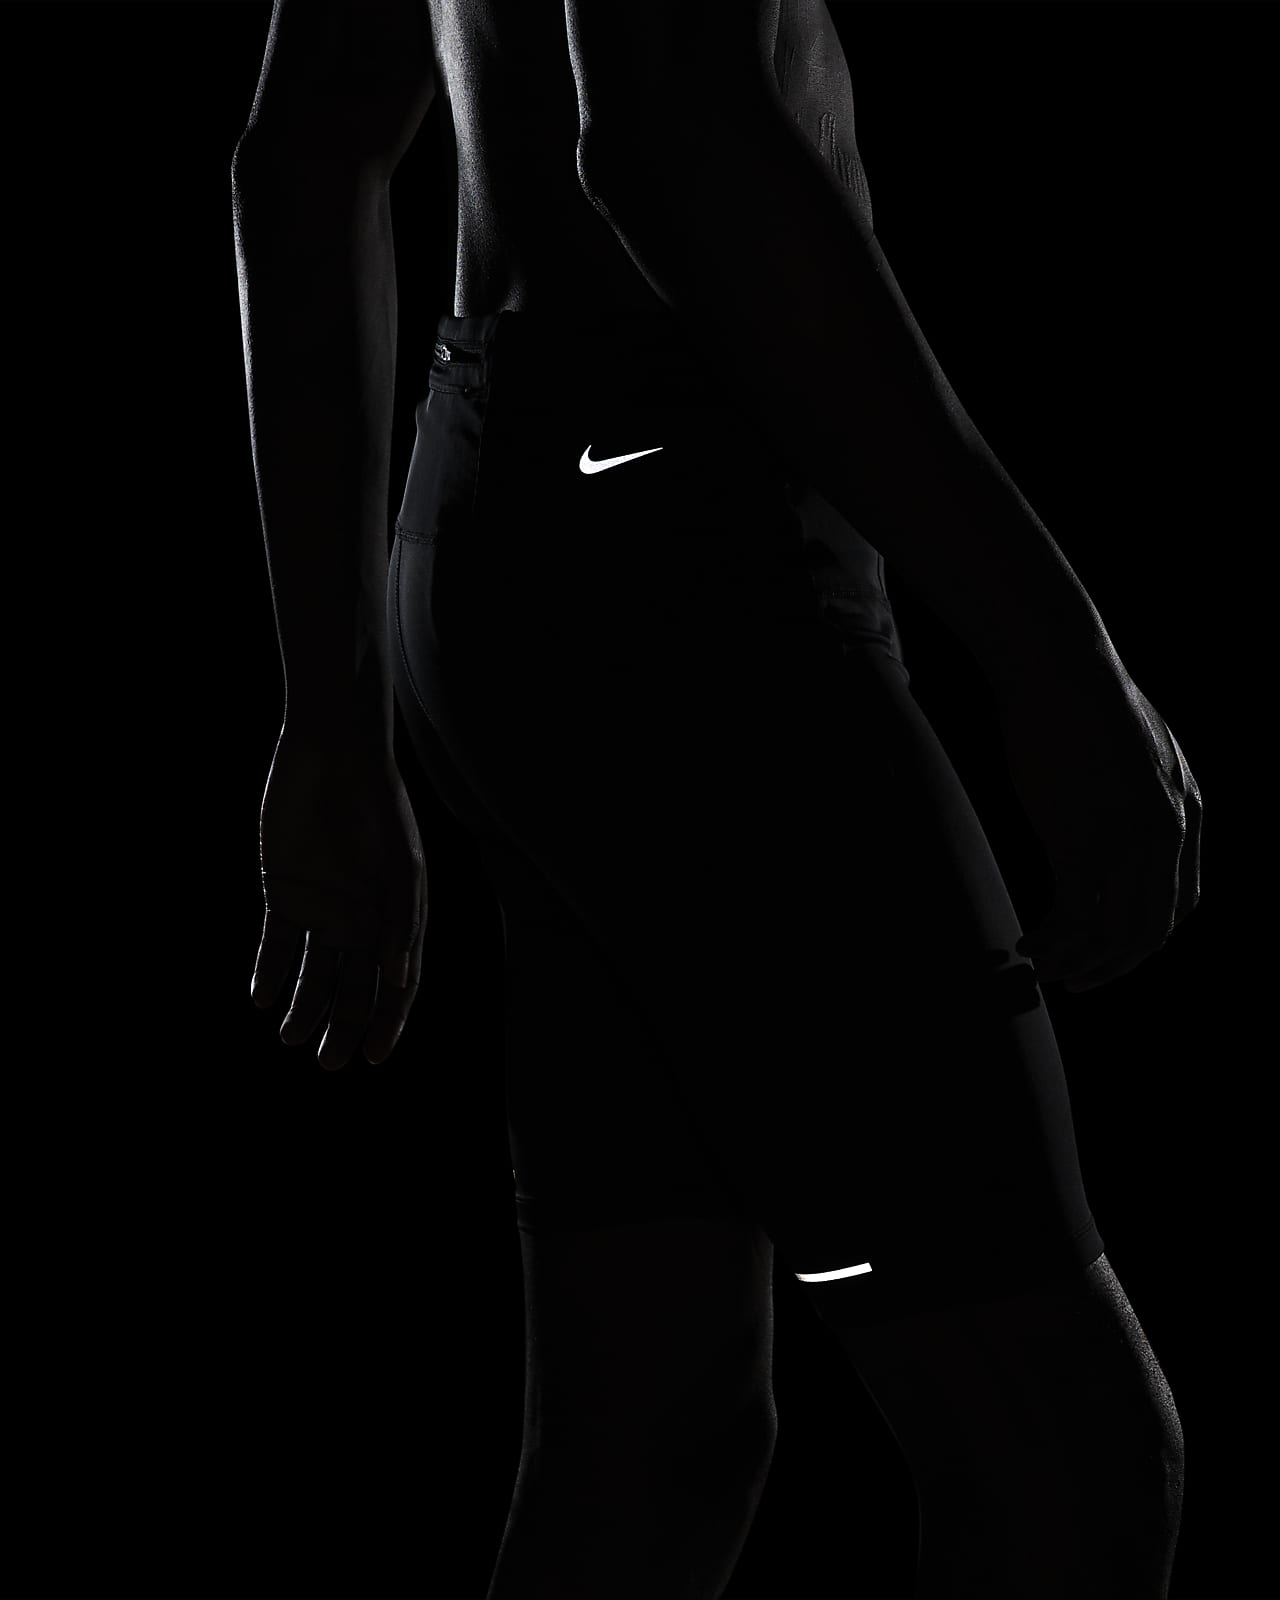 Nike Women's All-in Tight, Black/White, X-Small 